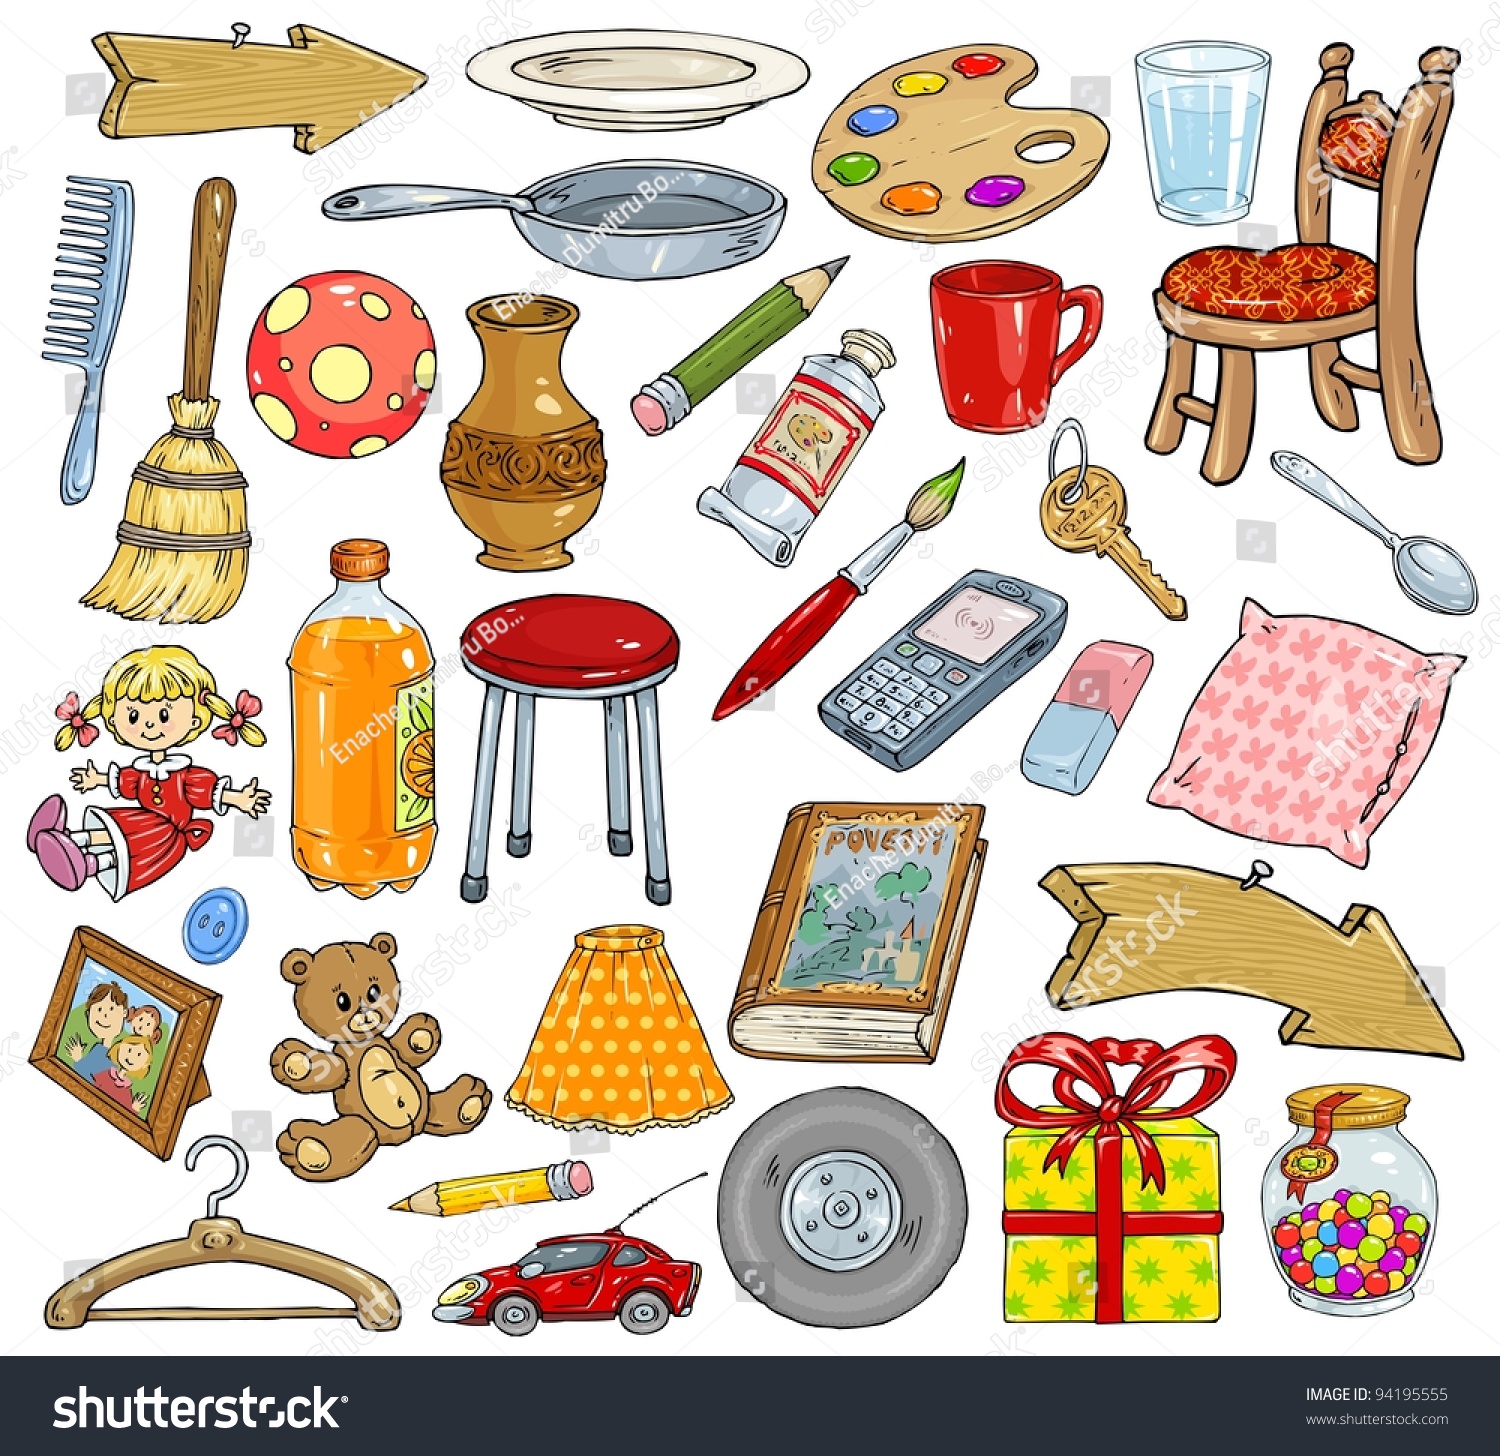 clipart of different objects - photo #27